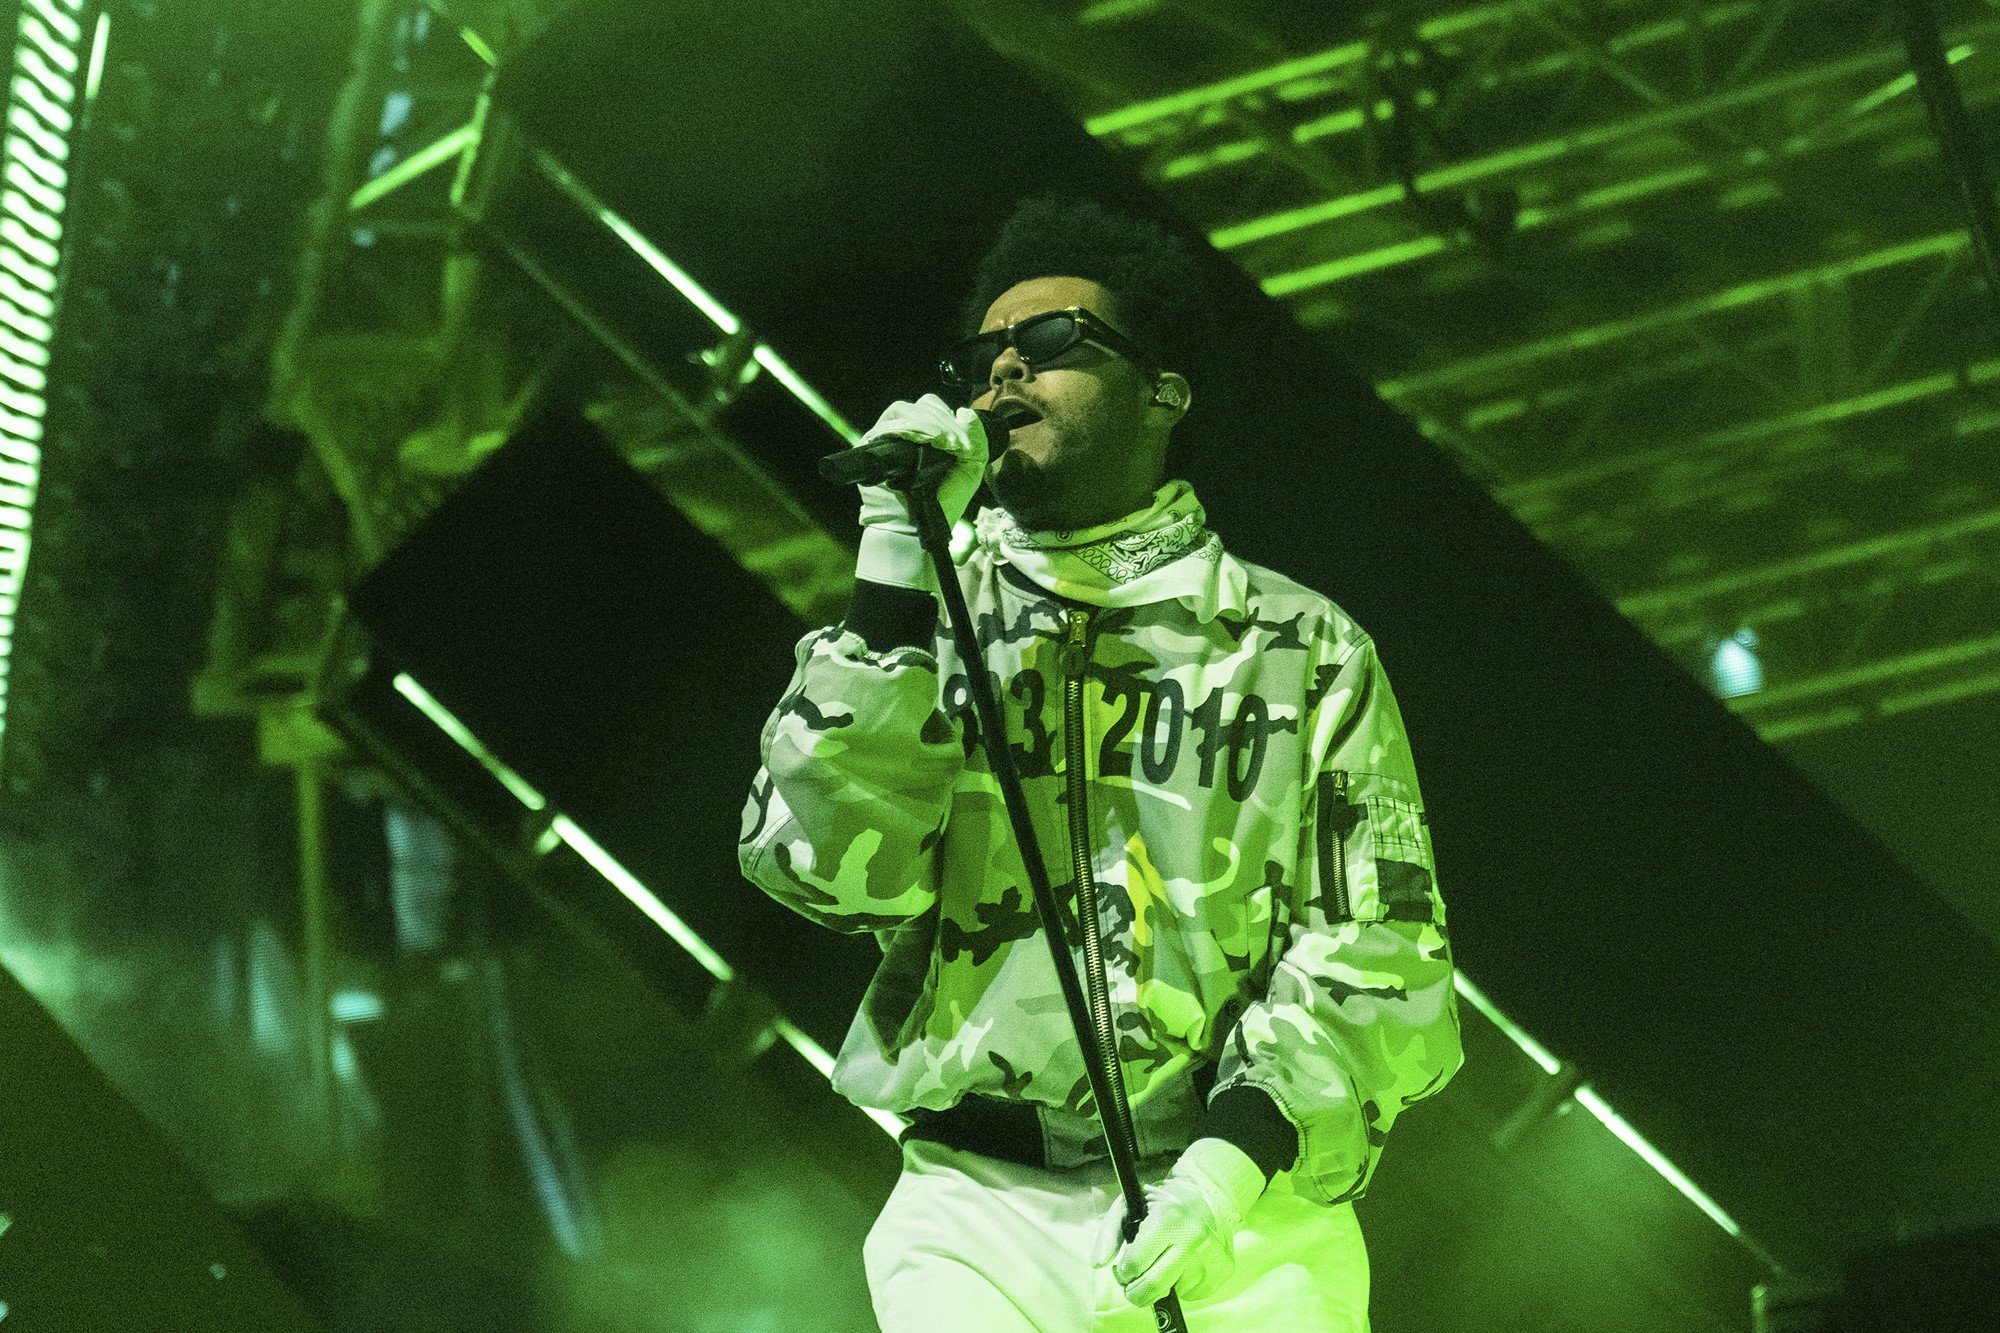 The Weeknd sings on stage, wearing a camo jacket, sunglasses and gloves